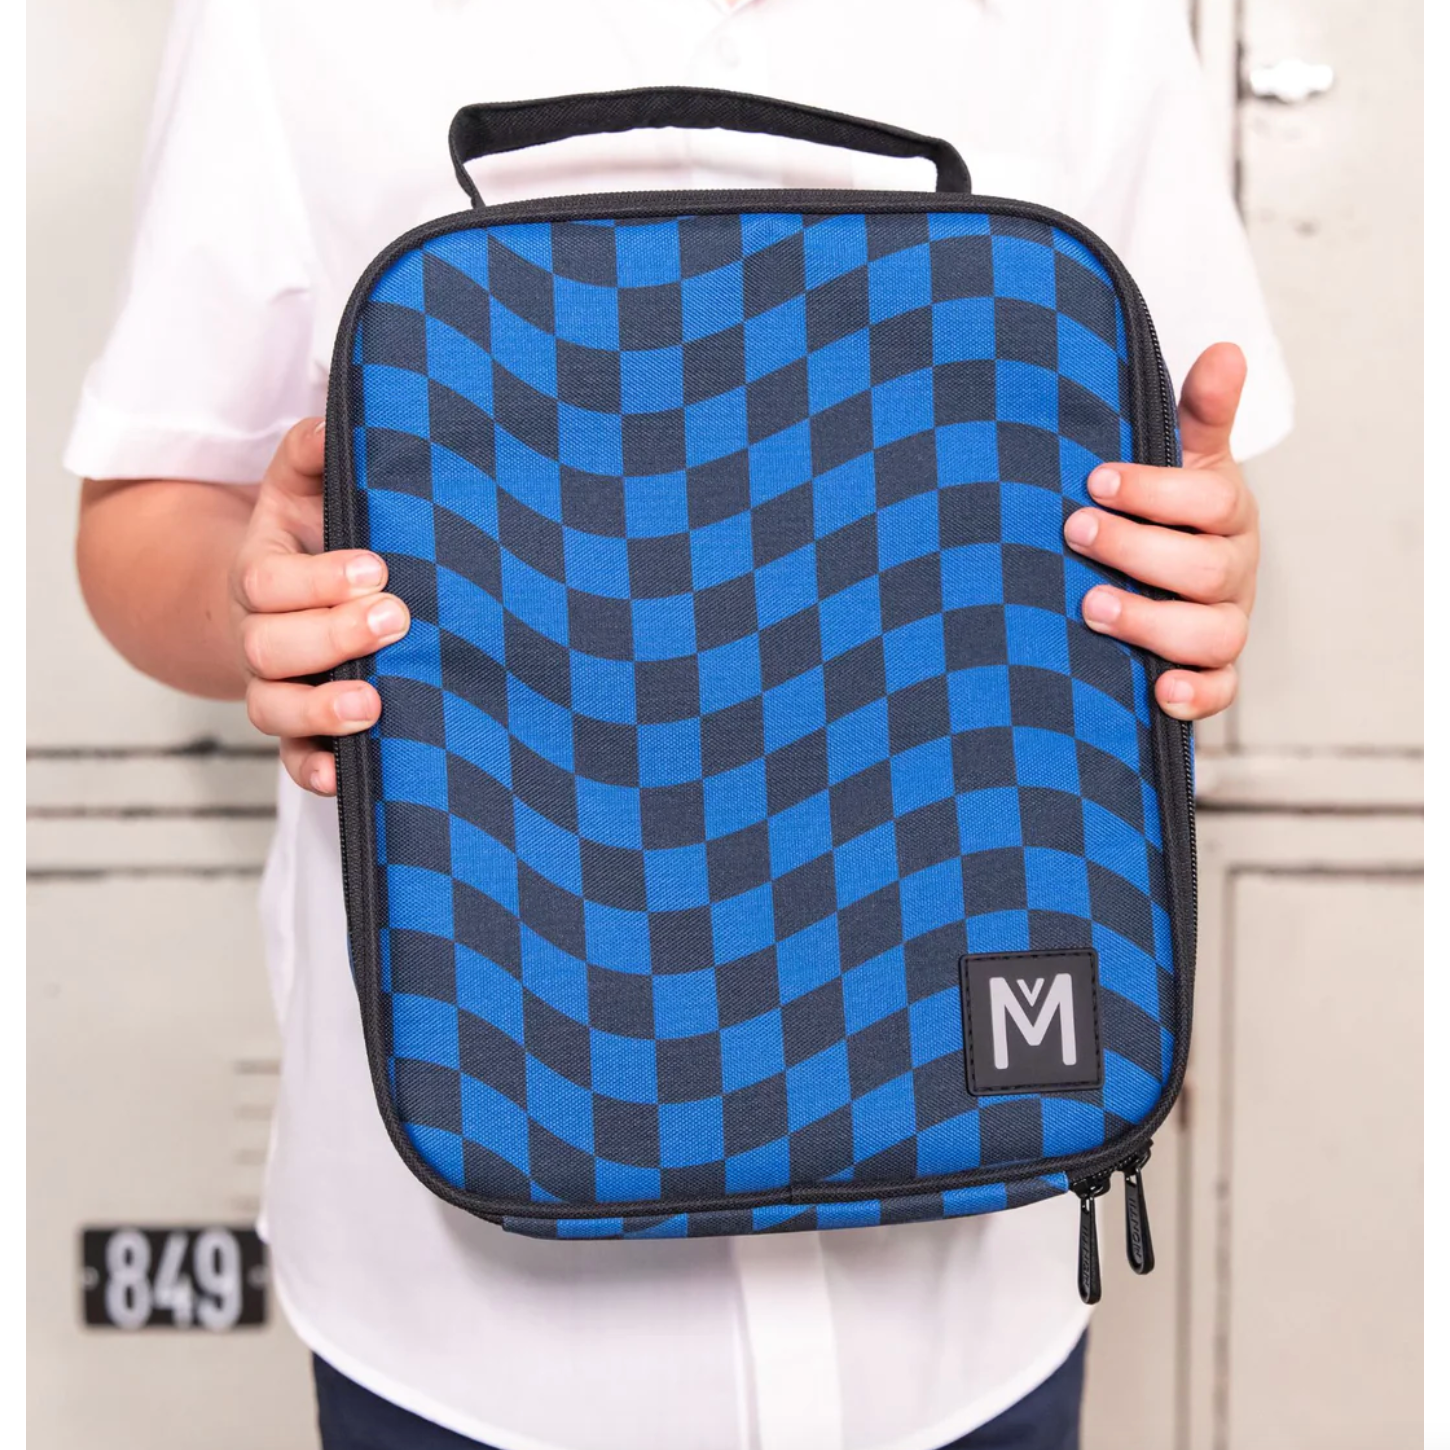 Large Insulated Lunch Bag - Retro Check